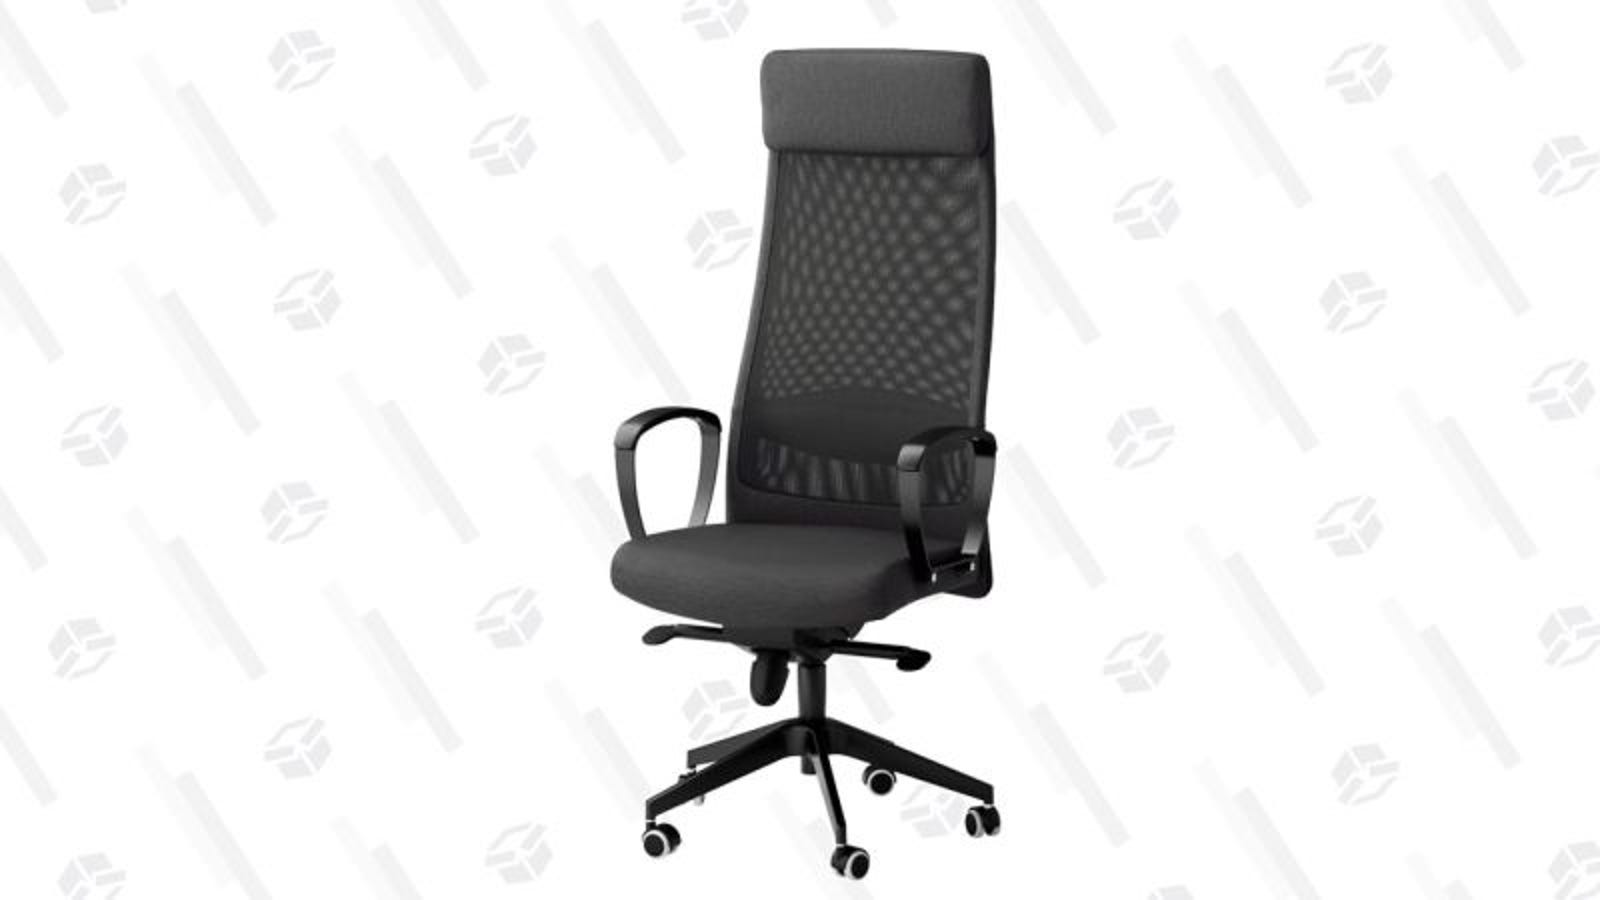 The Best Affordable Office Chair: IKEA Markus